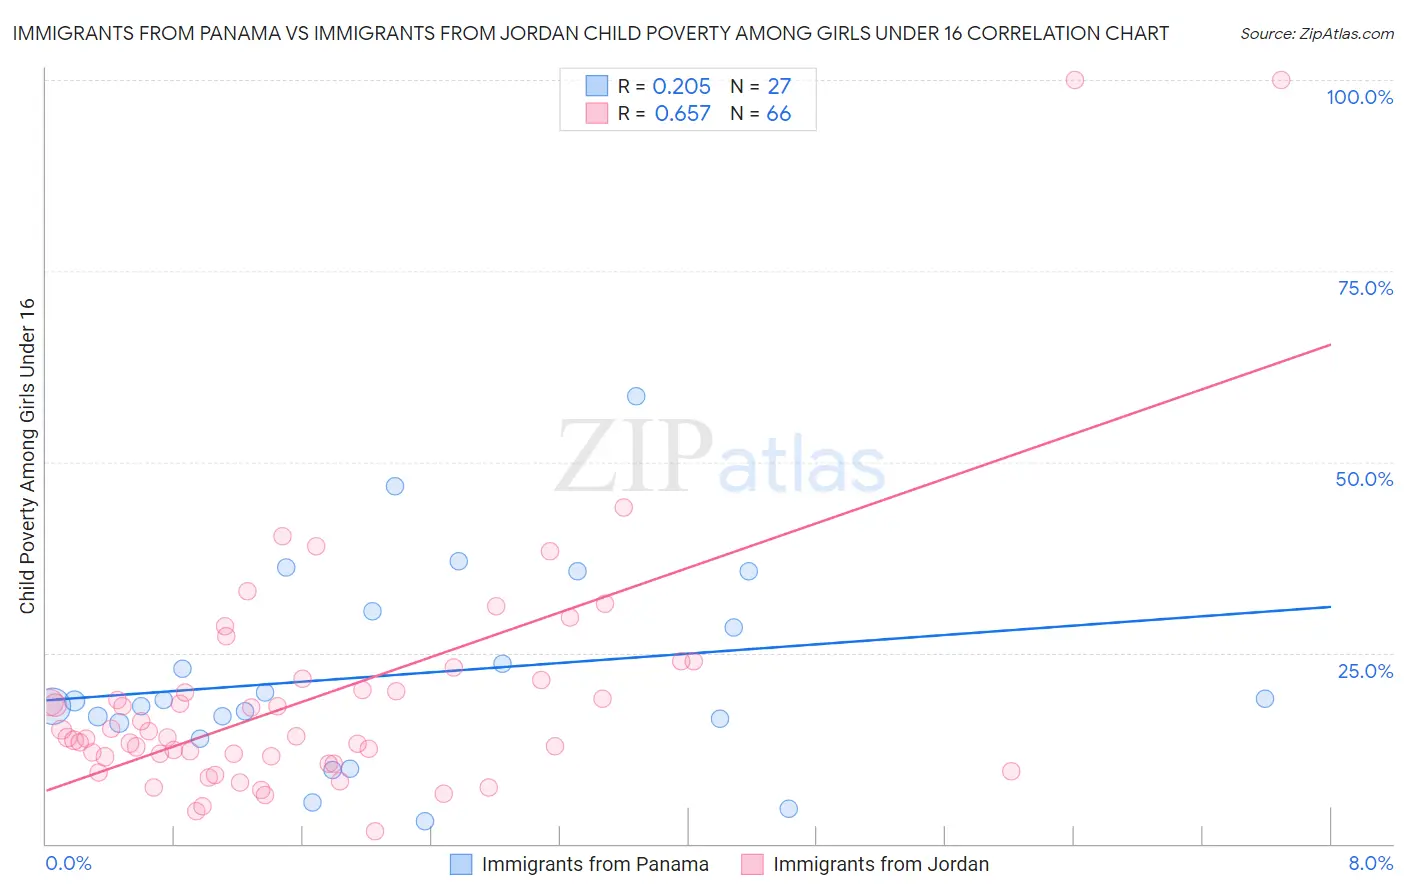 Immigrants from Panama vs Immigrants from Jordan Child Poverty Among Girls Under 16